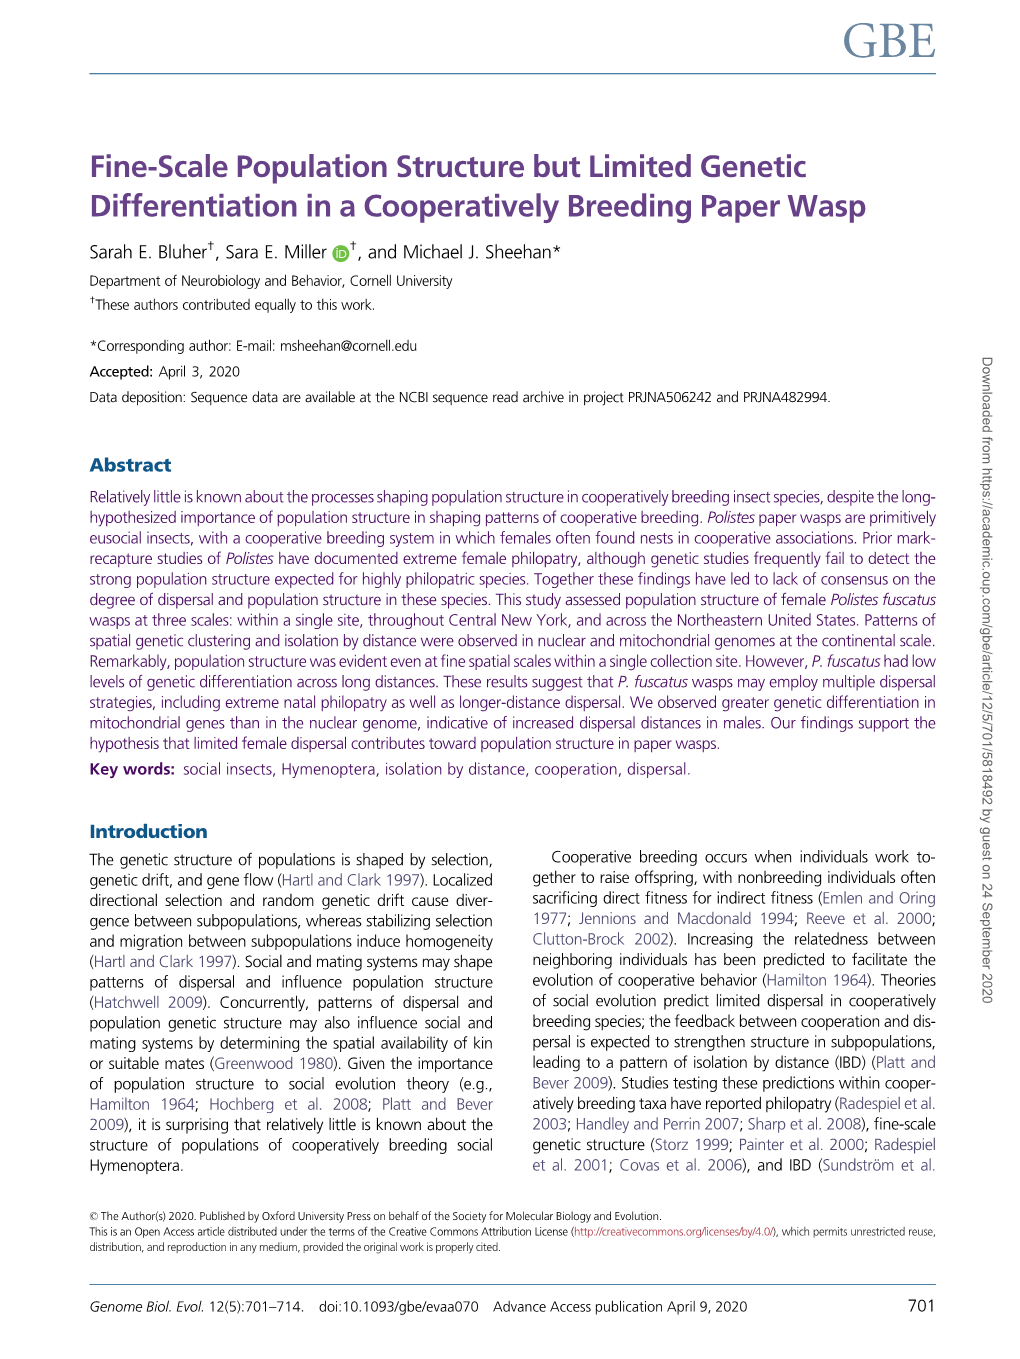 Fine-Scale Population Structure but Limited Genetic Differentiation in a Cooperatively Breeding Paper Wasp